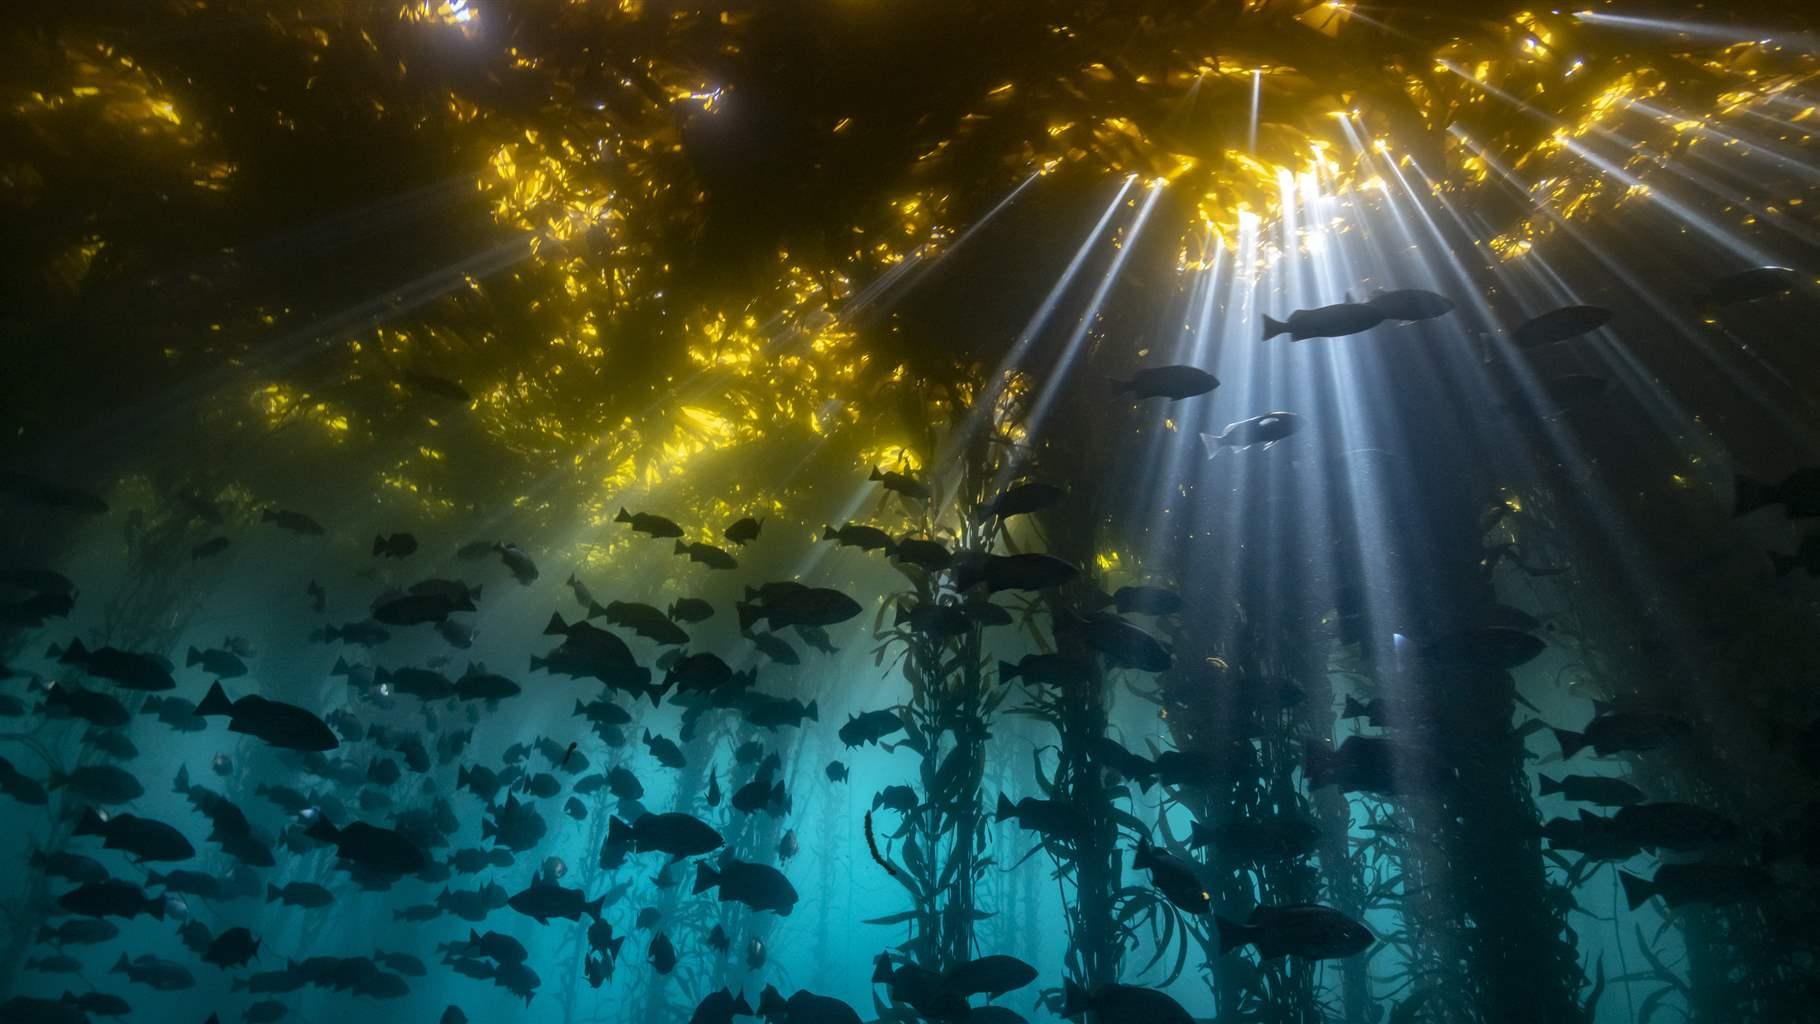 Sunbeams penetrate the kelp forest canopy with fishes swimming throughout the underwater forest